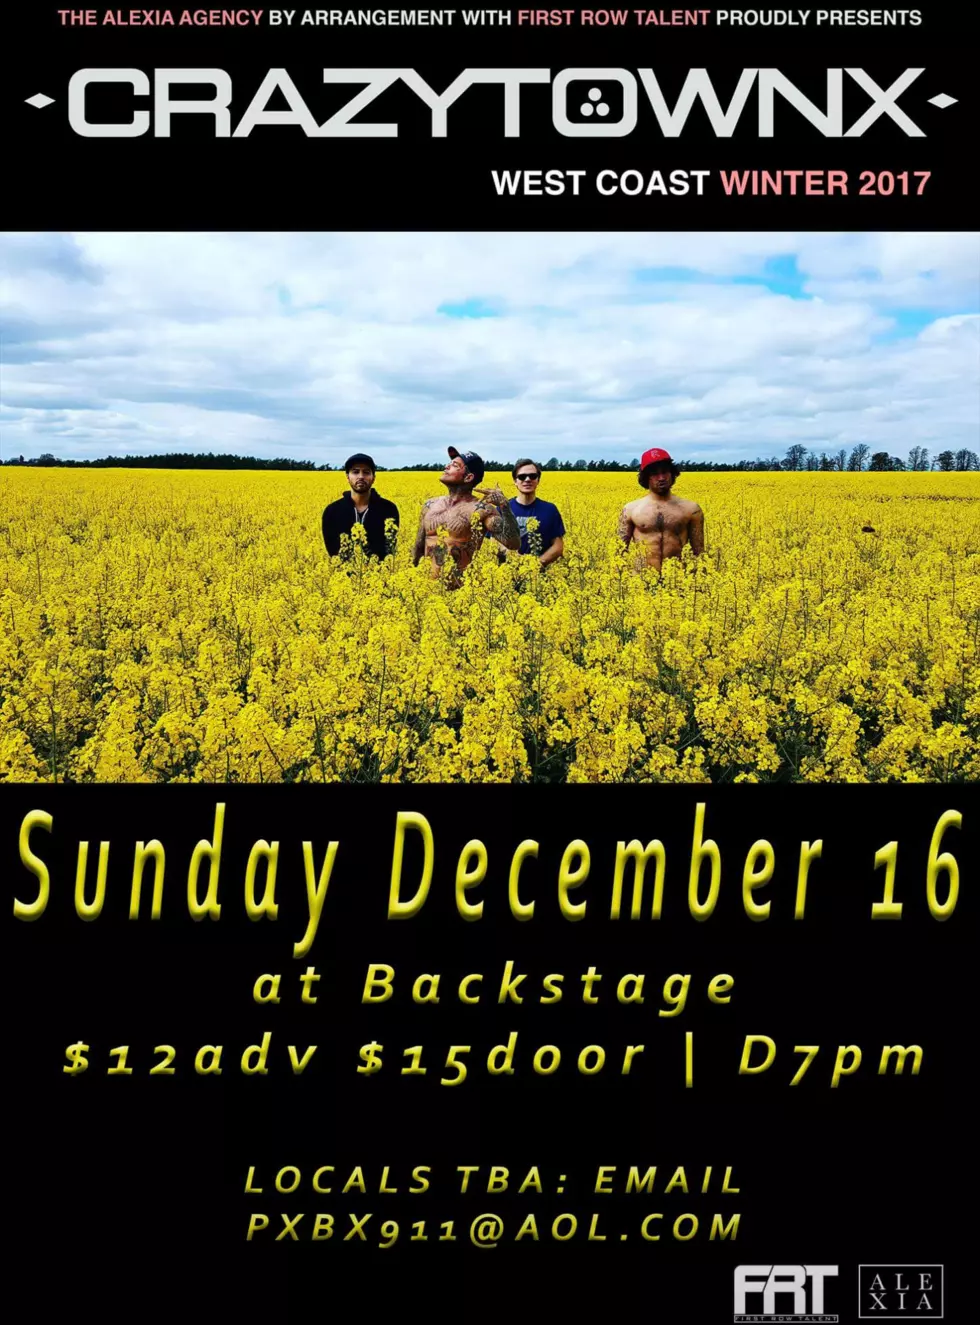 Crazytown At Backstage Lubbock Sunday, December 17